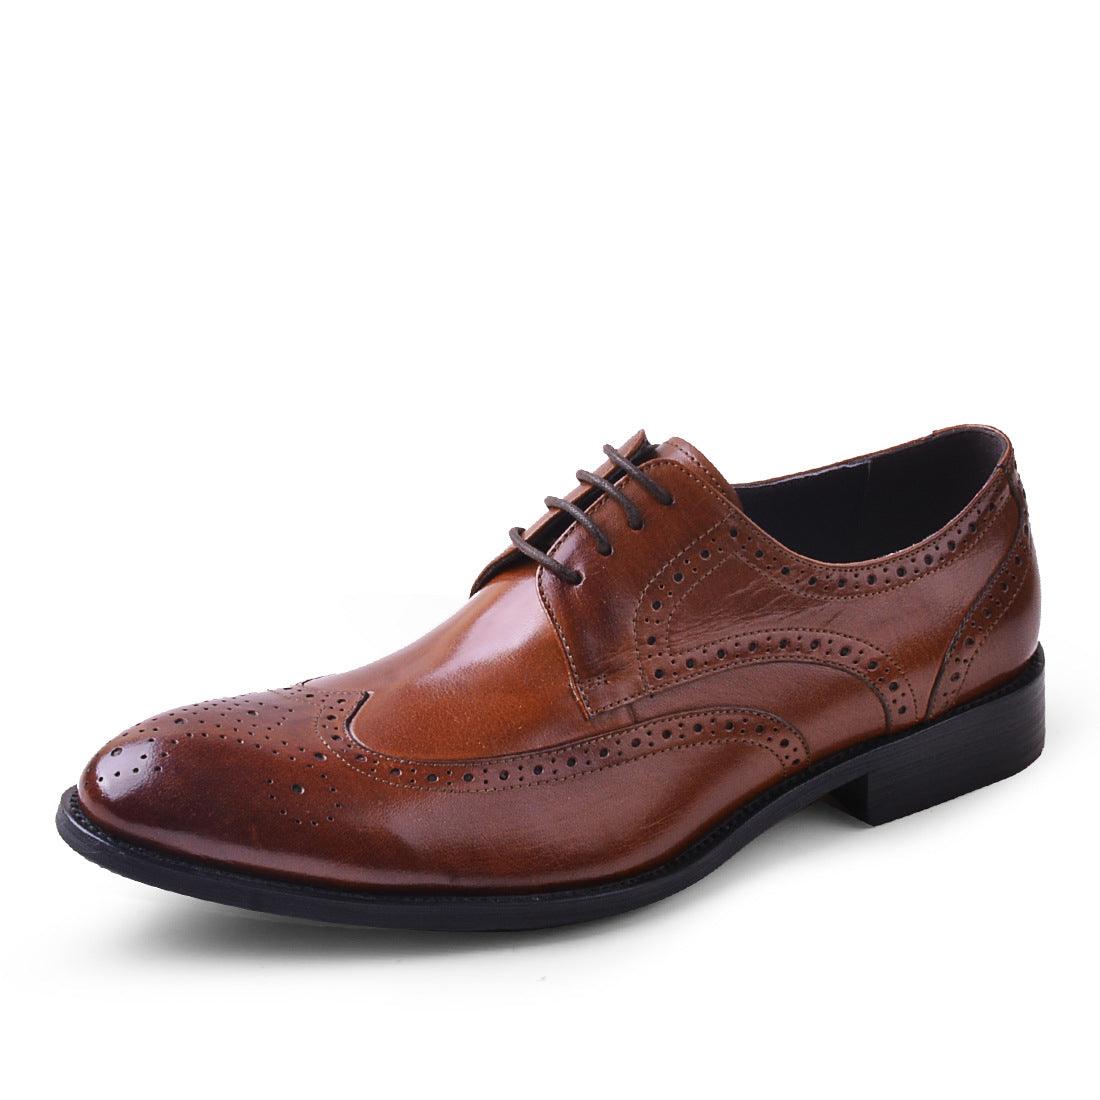 Brogues leather shoes